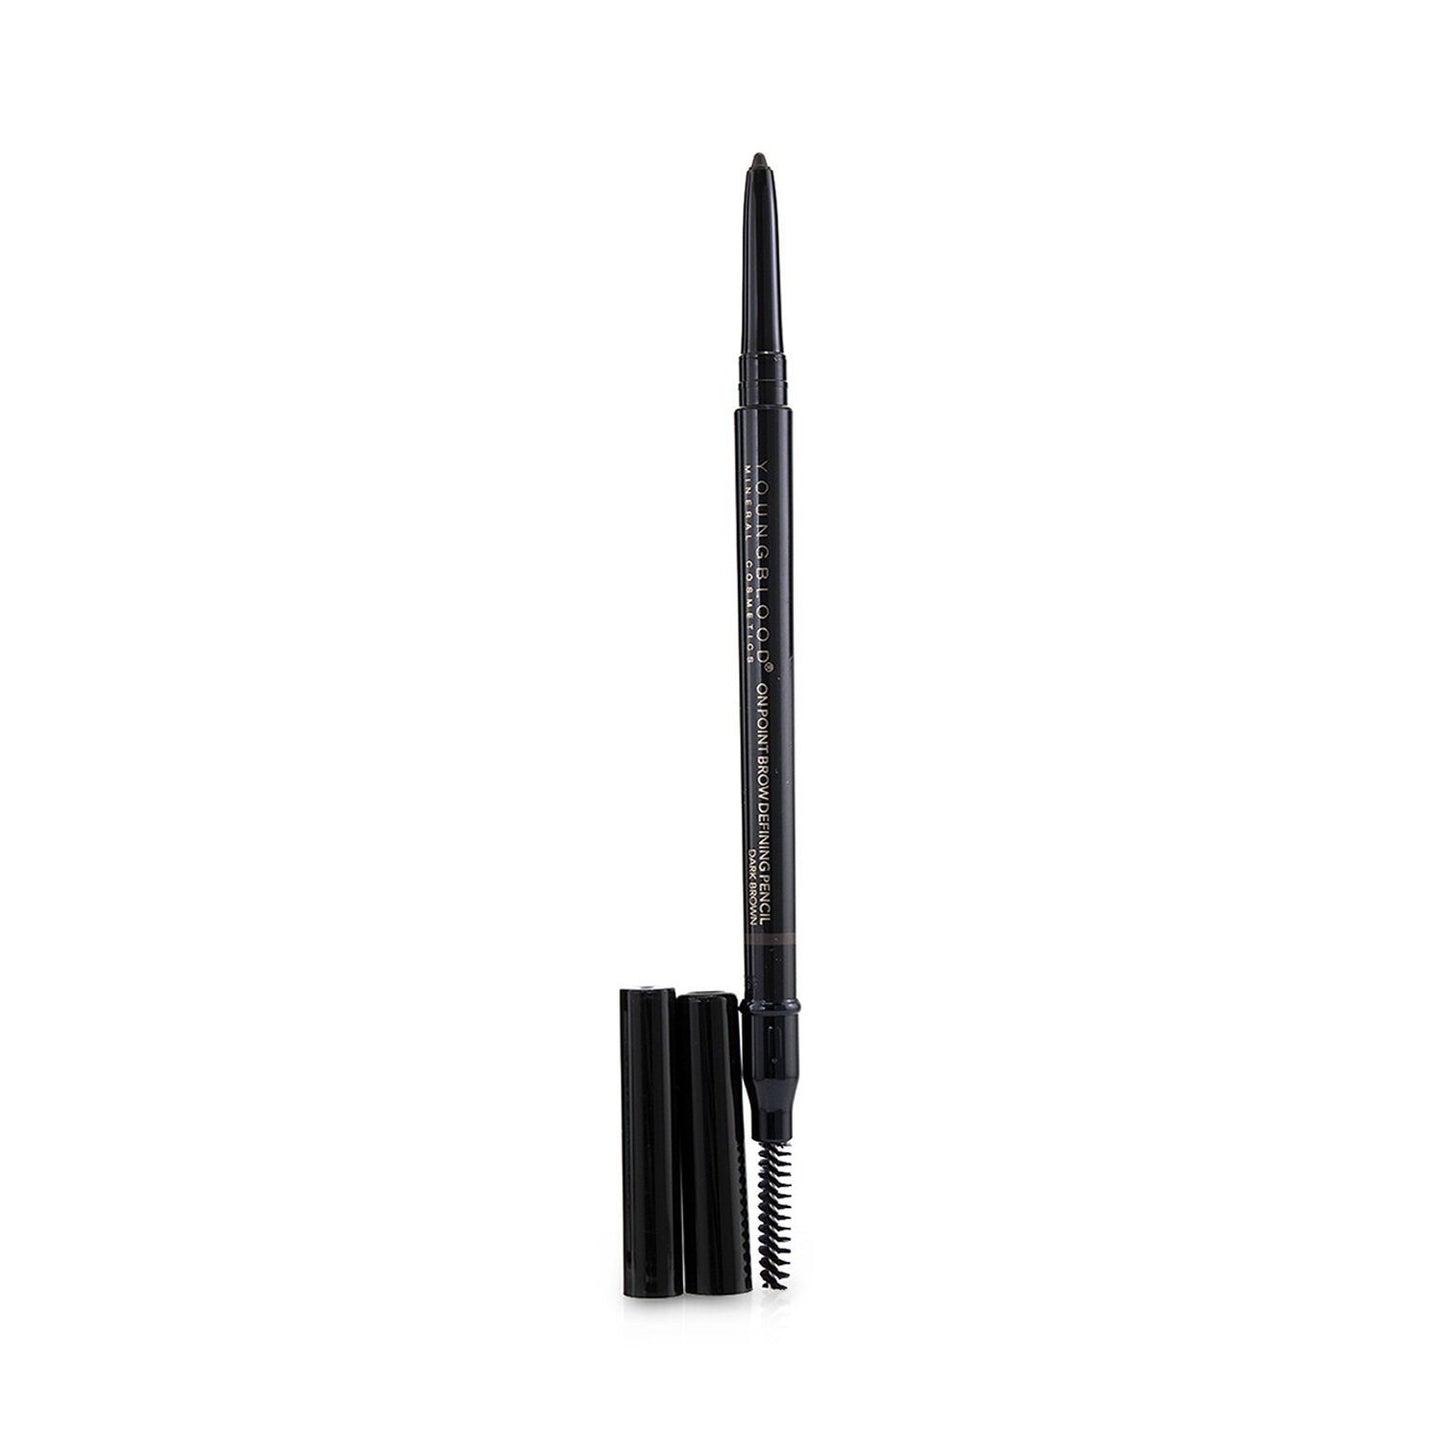 YOUNGBLOOD - On Point Brow Defining Pencil - # Dark Brown 01A9/19106 0.35g/0.012oz